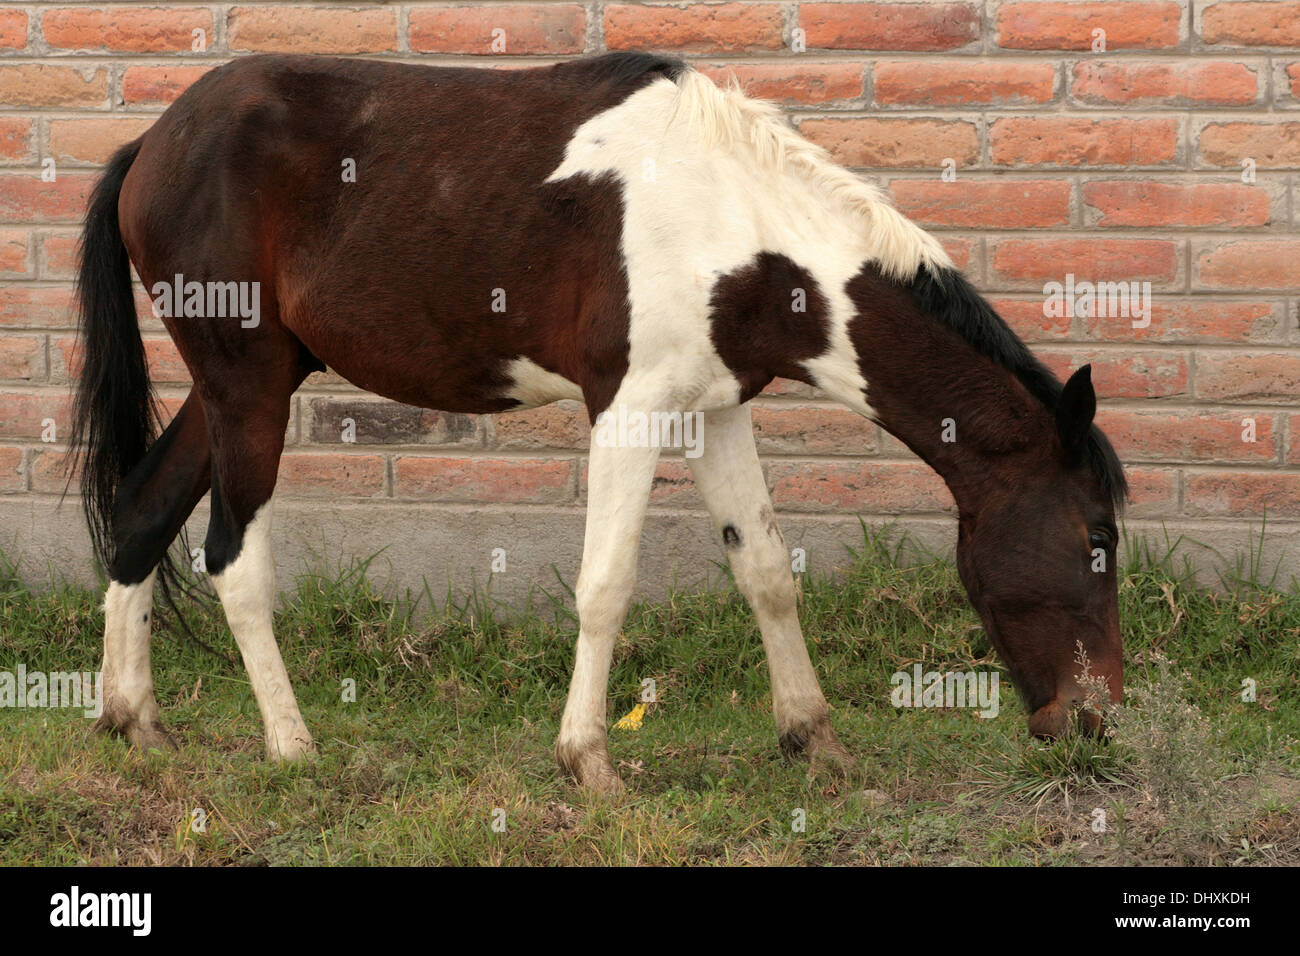 A brown and white horse in a farmers pasture in Cotacachi, Ecuador Stock Photo